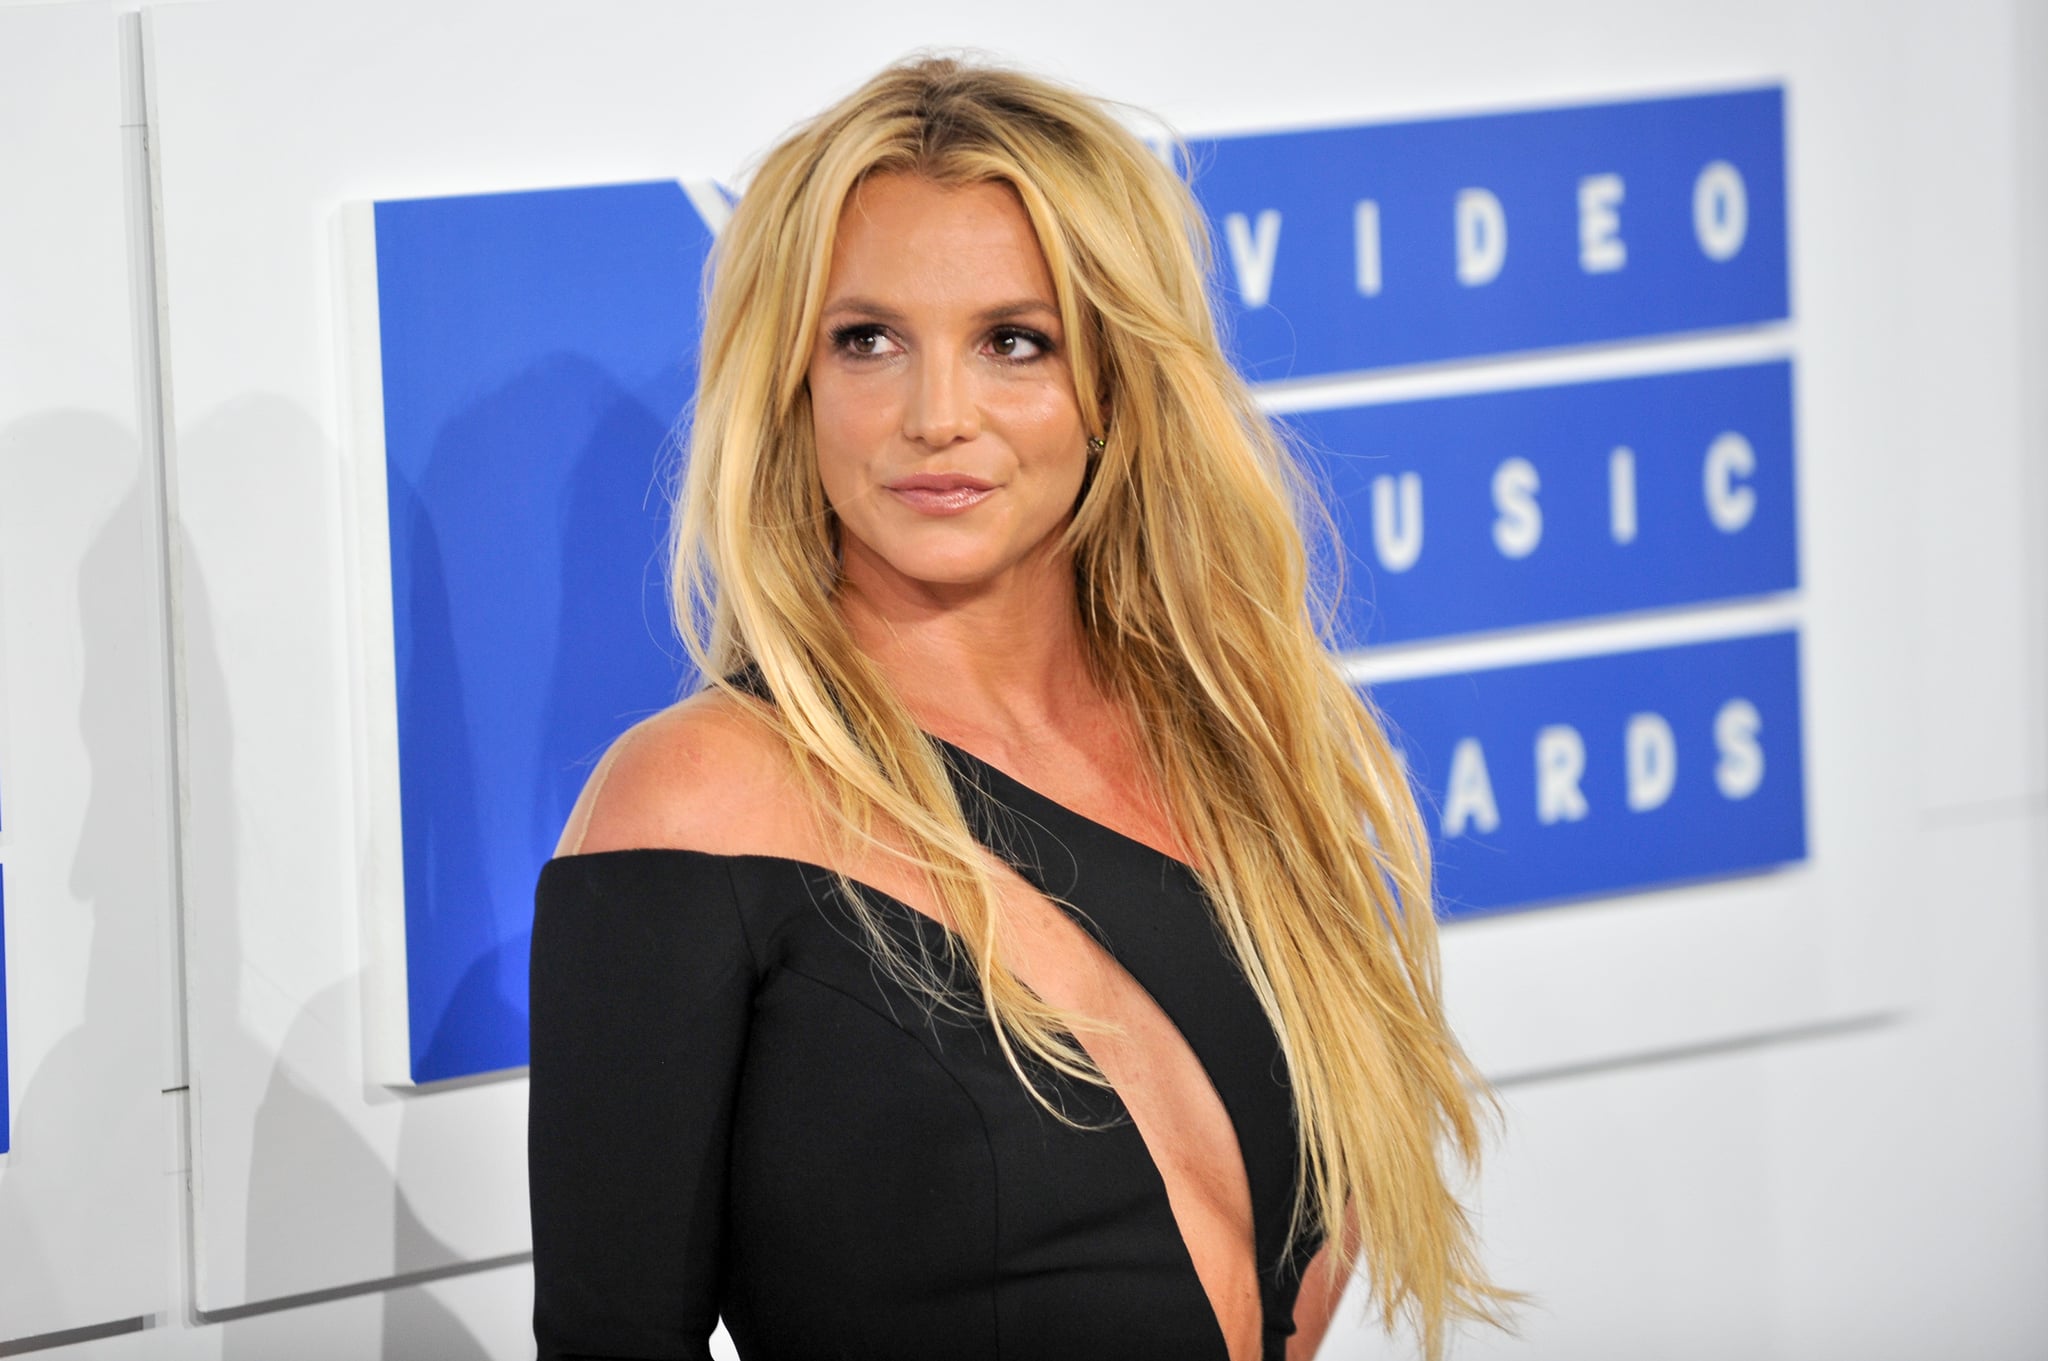 Britney Spears Speaks Out About Her Family Saying "This Conservatorship Killed My Dreams"